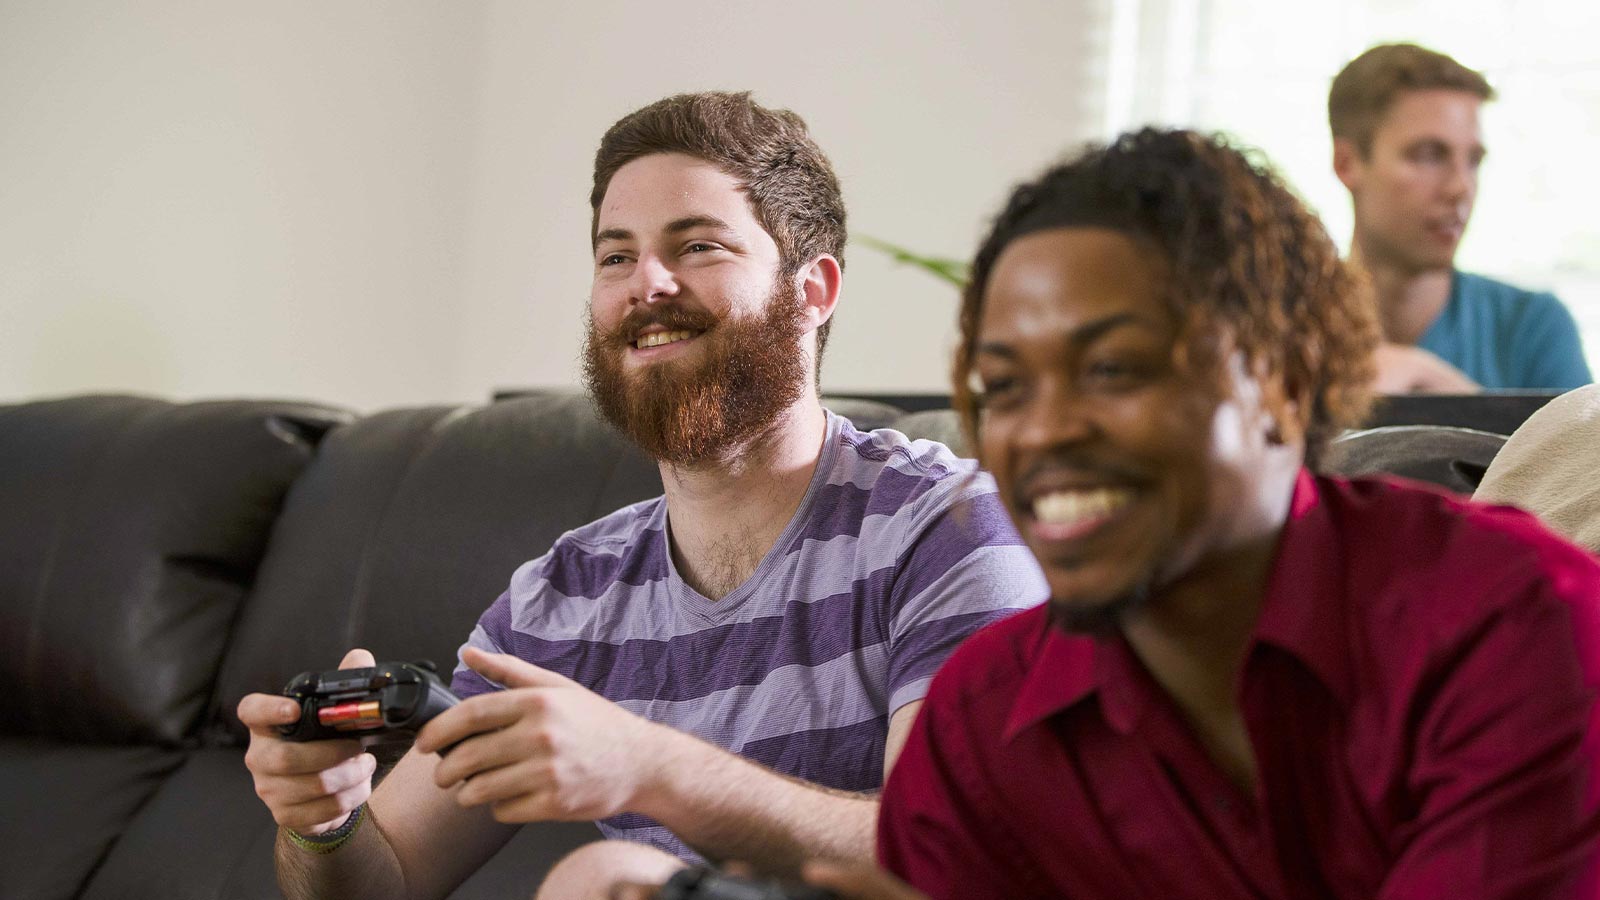 Two men playing video games on a couch.